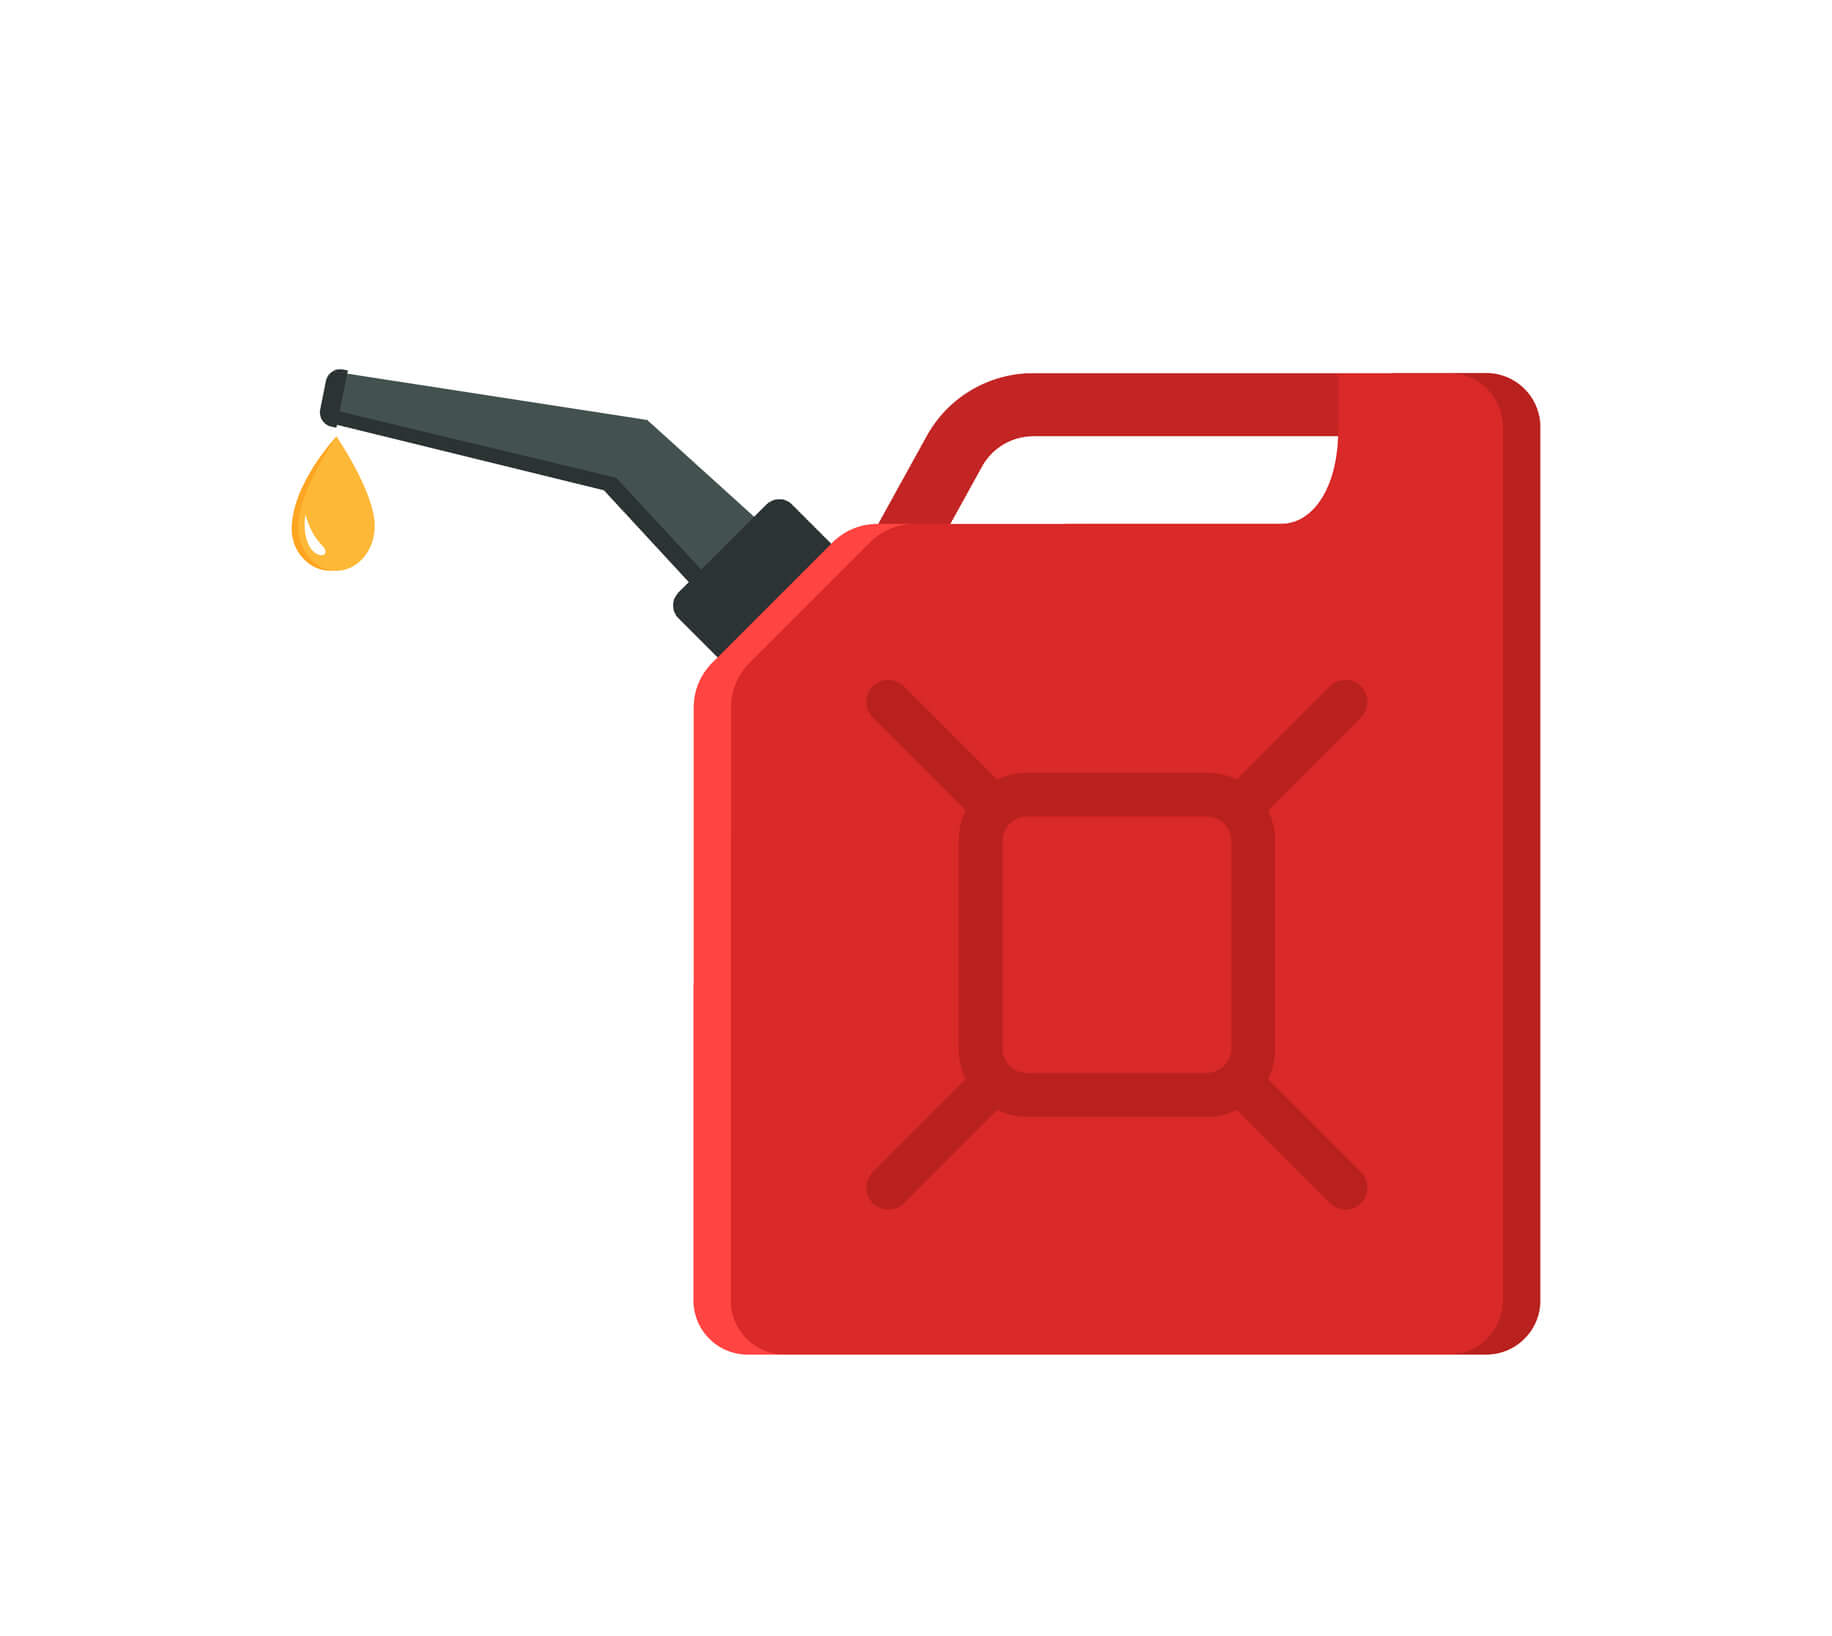 Can of fuel. Canister with gasoline. Red jerrycan with fuel. Icon of jerry for diesel and petrol. Plastic bottle for car. Flat cartoon icon. Vector.